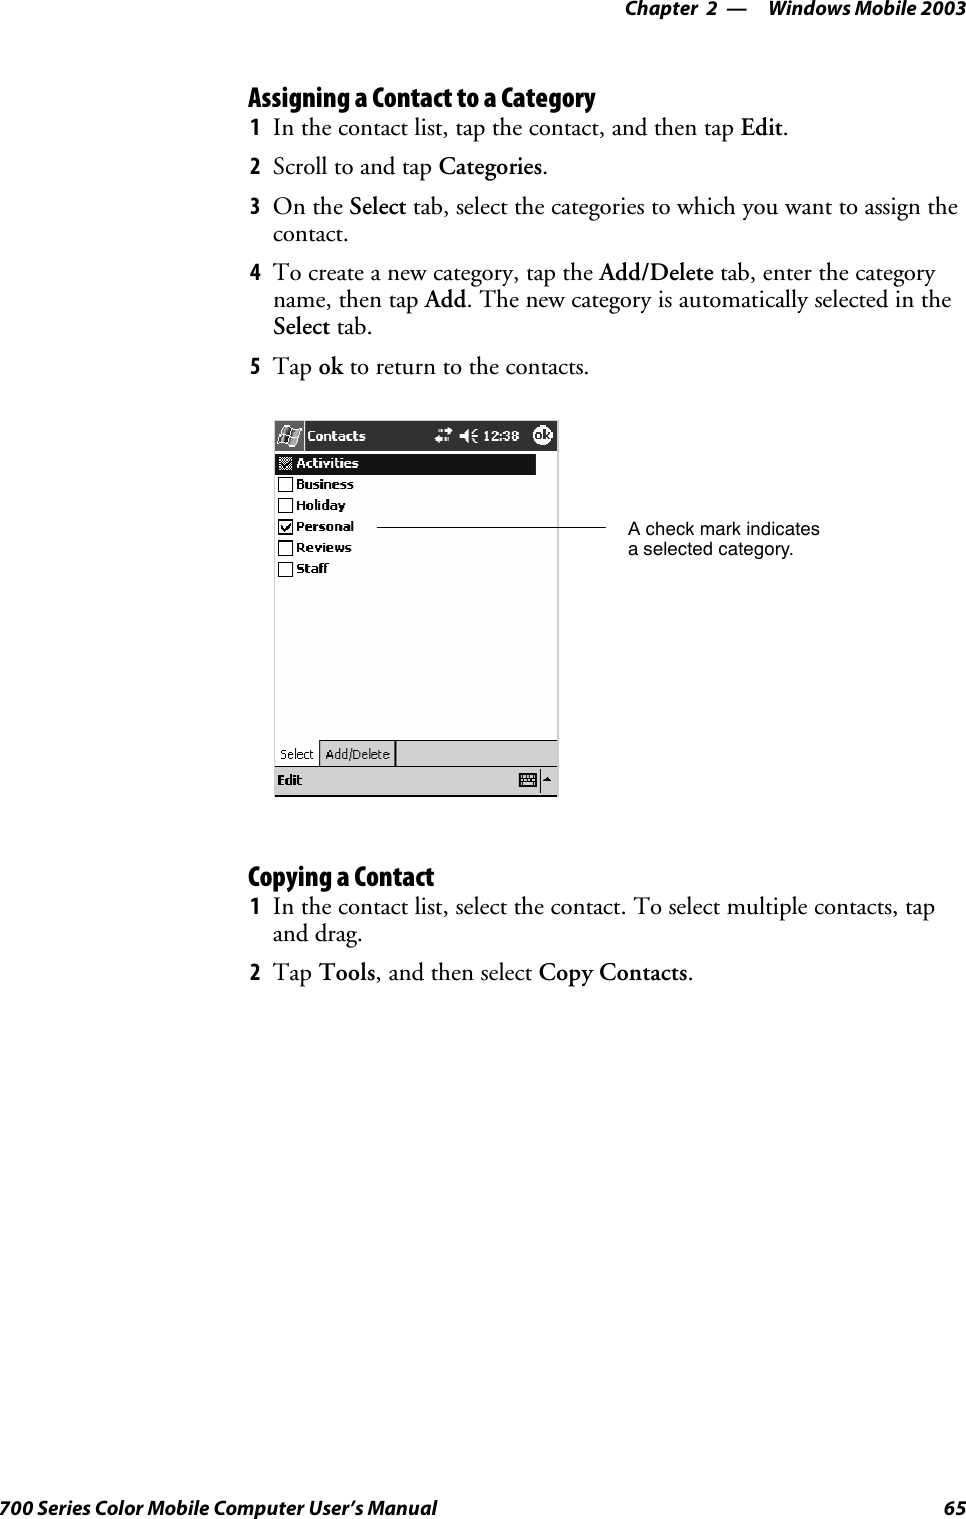 Windows Mobile 2003—Chapter 265700 Series Color Mobile Computer User’s ManualAssigning a Contact to a Category1In the contact list, tap the contact, and then tap Edit.2Scroll to and tap Categories.3On the Select tab, select the categories to which you want to assign thecontact.4To create a new category, tap the Add/Delete tab, enter the categoryname, then tap Add. The new category is automatically selected in theSelect tab.5Tap ok to return to the contacts.A check mark indicatesa selected category.Copying a Contact1In the contact list, select the contact. To select multiple contacts, tapand drag.2Tap Tools,andthenselectCopy Contacts.